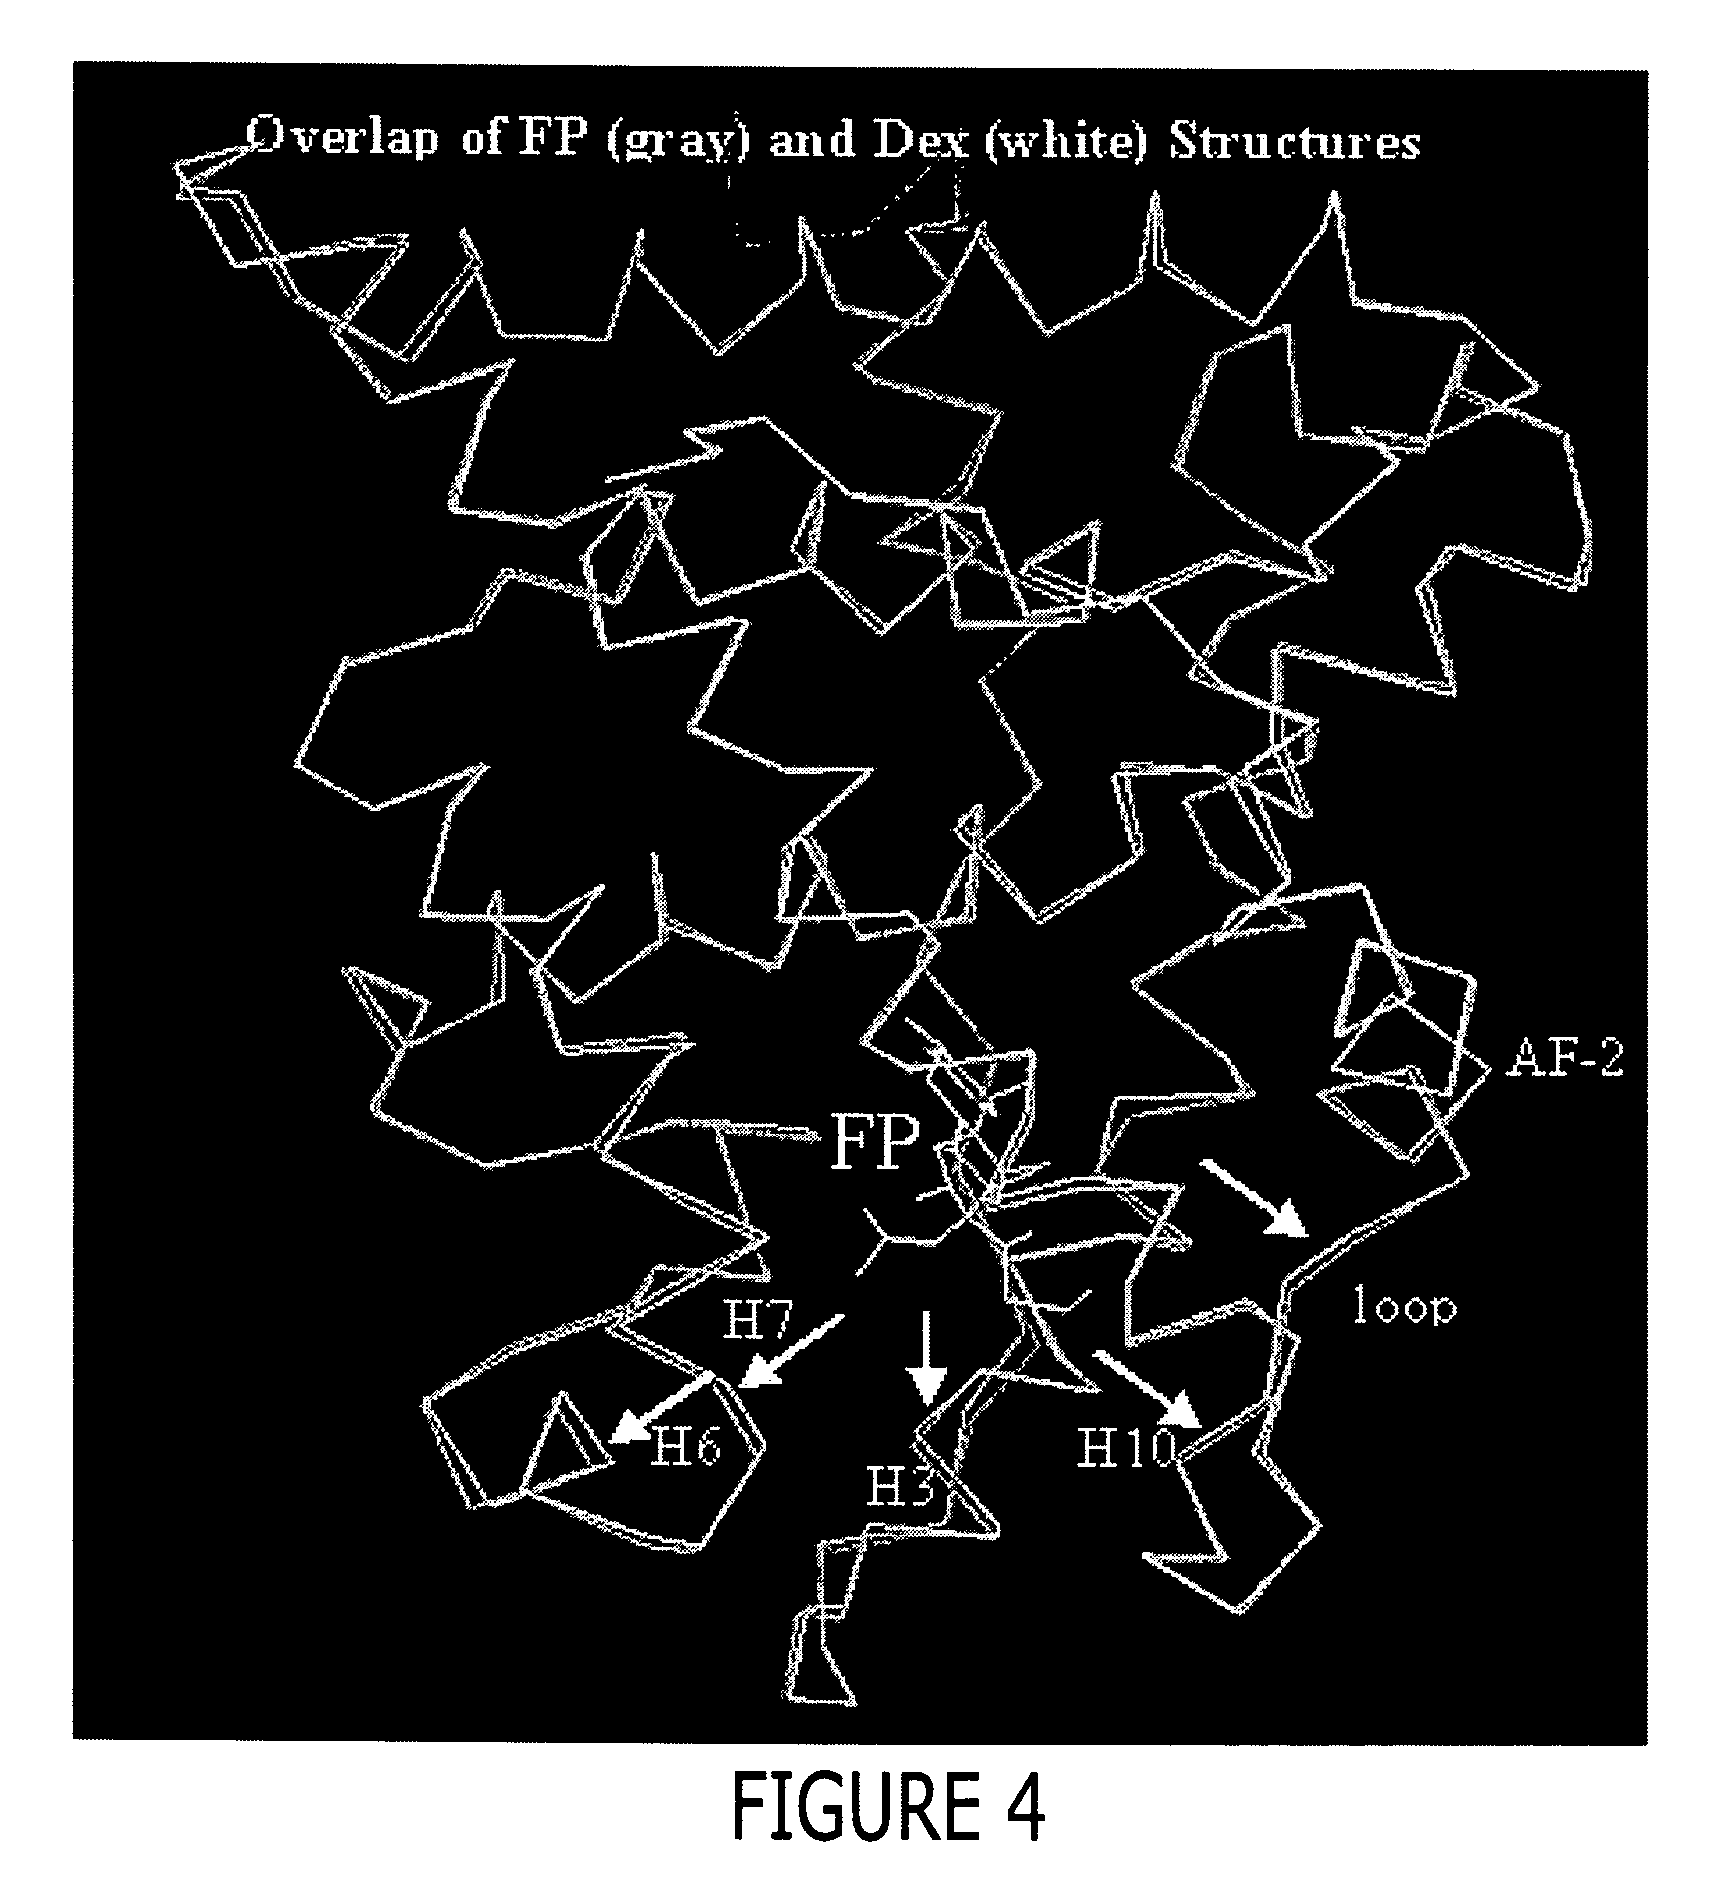 Structure of a glucocorticoid receptor ligand binding domain comprising an expanded binding pocket and methods employing same